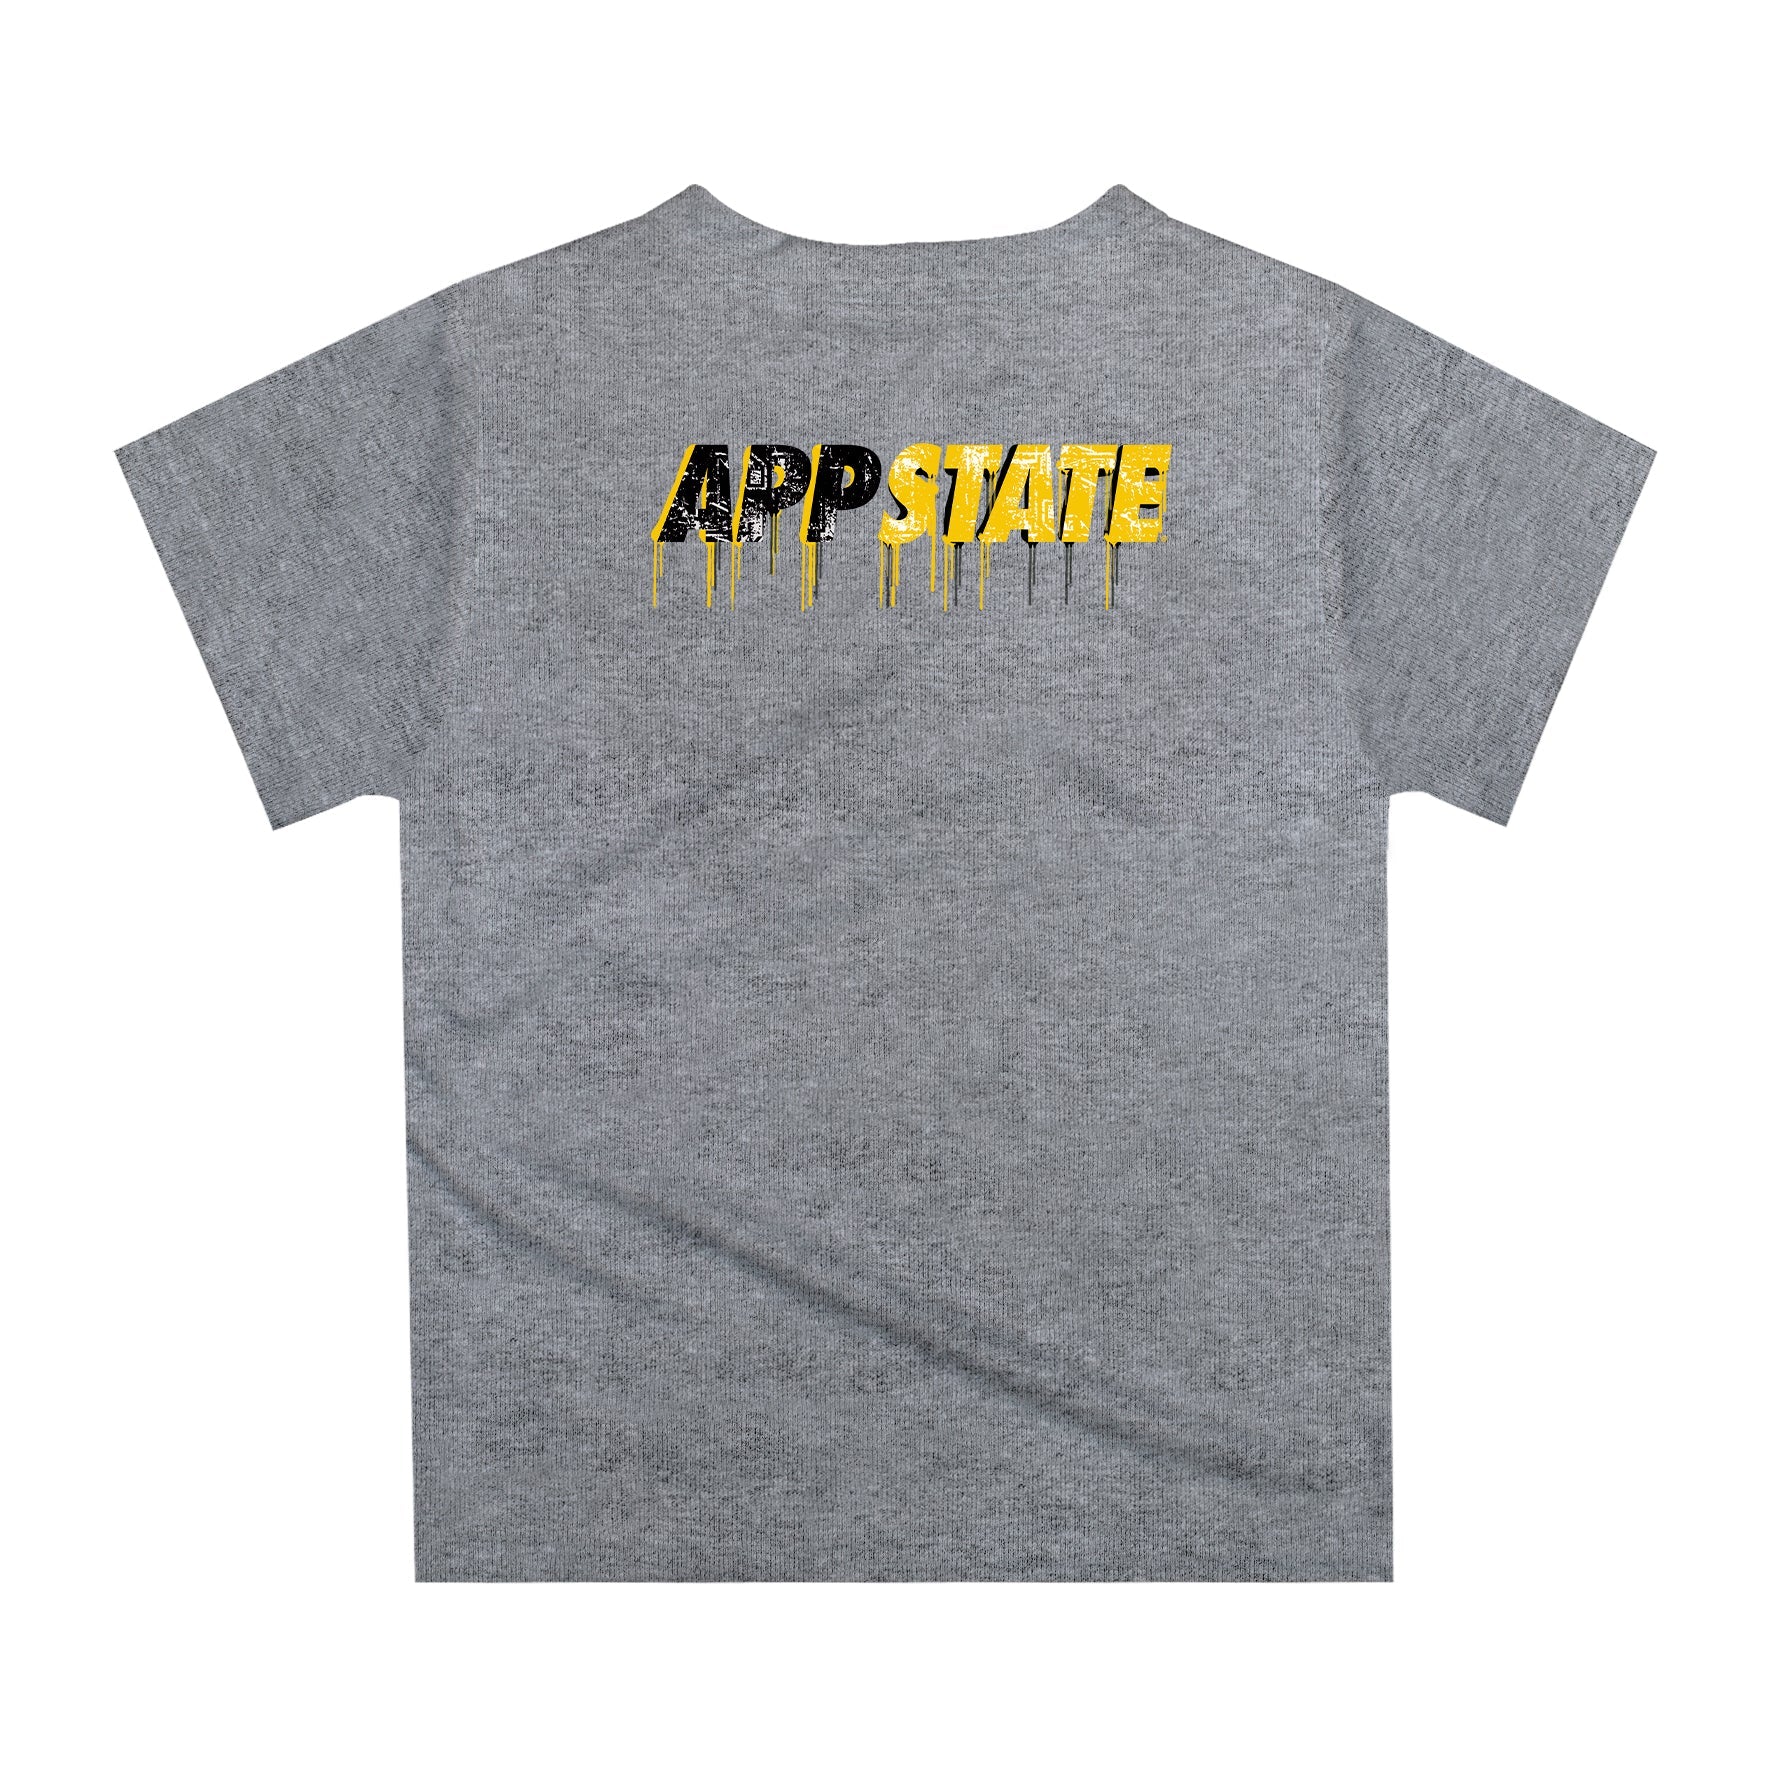 App State Mountaineers Original Dripping Football Helmet Heather Gray T-Shirt by Vive La Fete